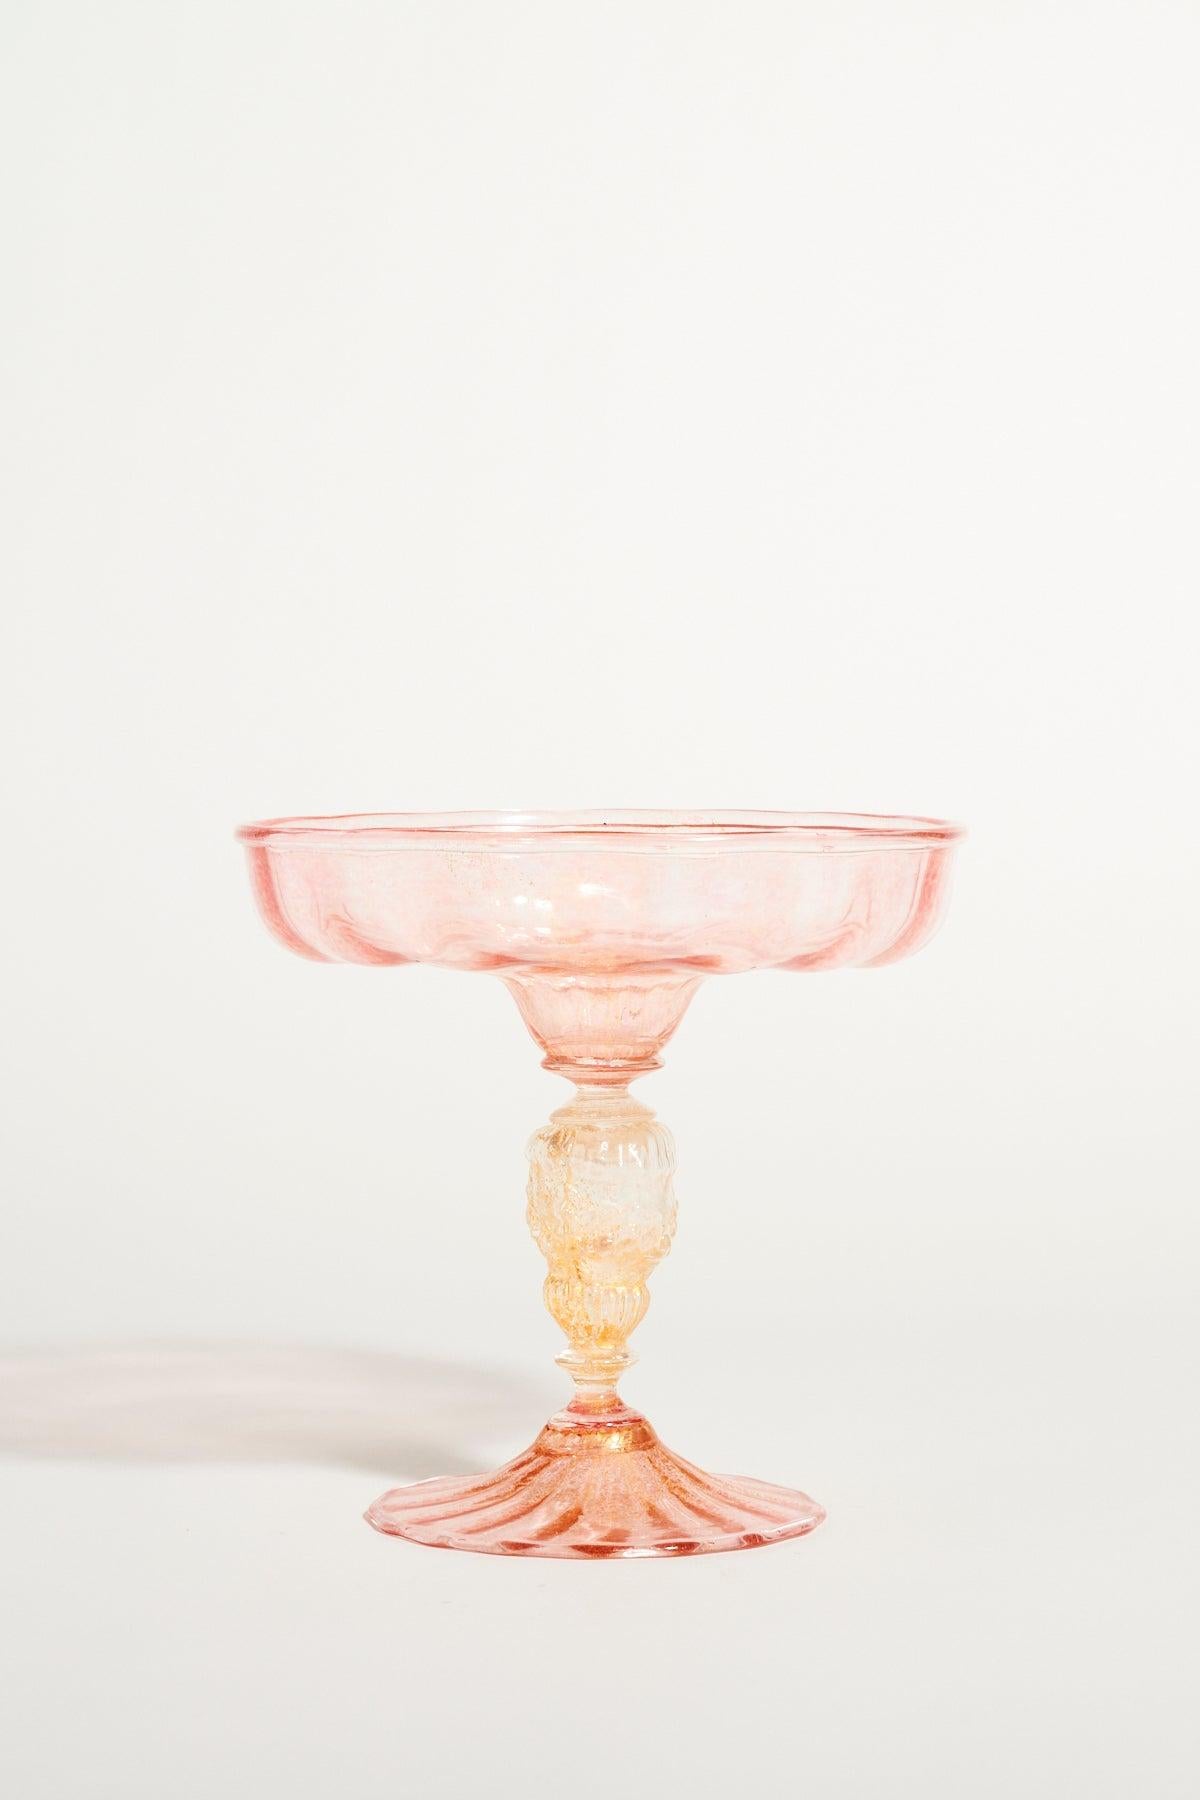 Pretty Venetian glass compote with fluted shallow bowl in pale pink and clear decorative stem flecked with gold.